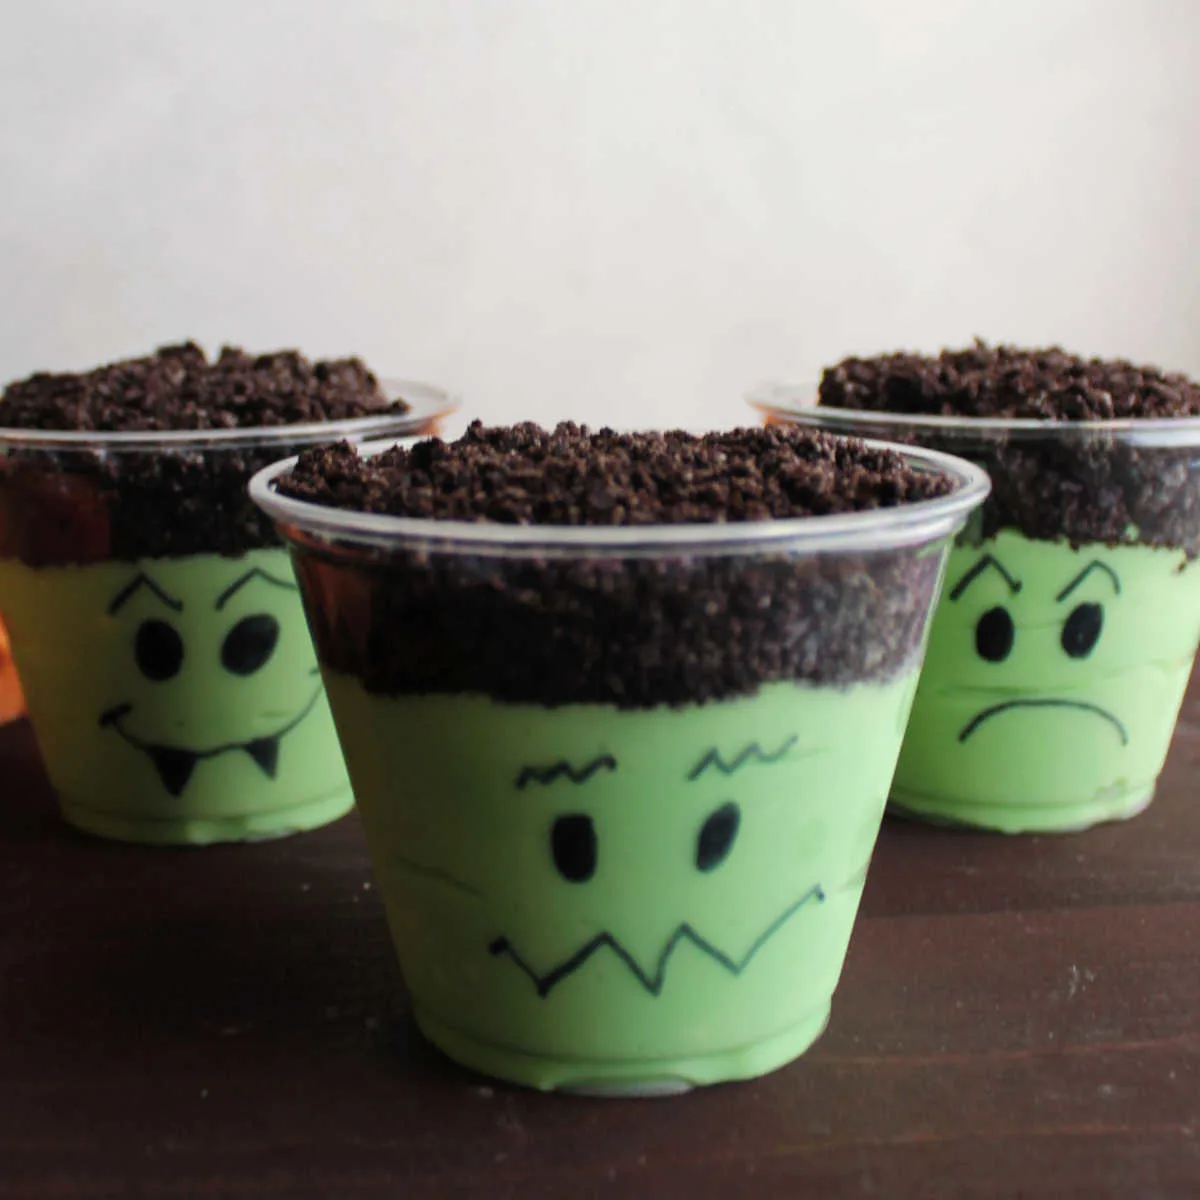 Three pudding cups with green pudding mixture and chocolate cookie crumb topping with faces drawn on them to look like Frankenstein.